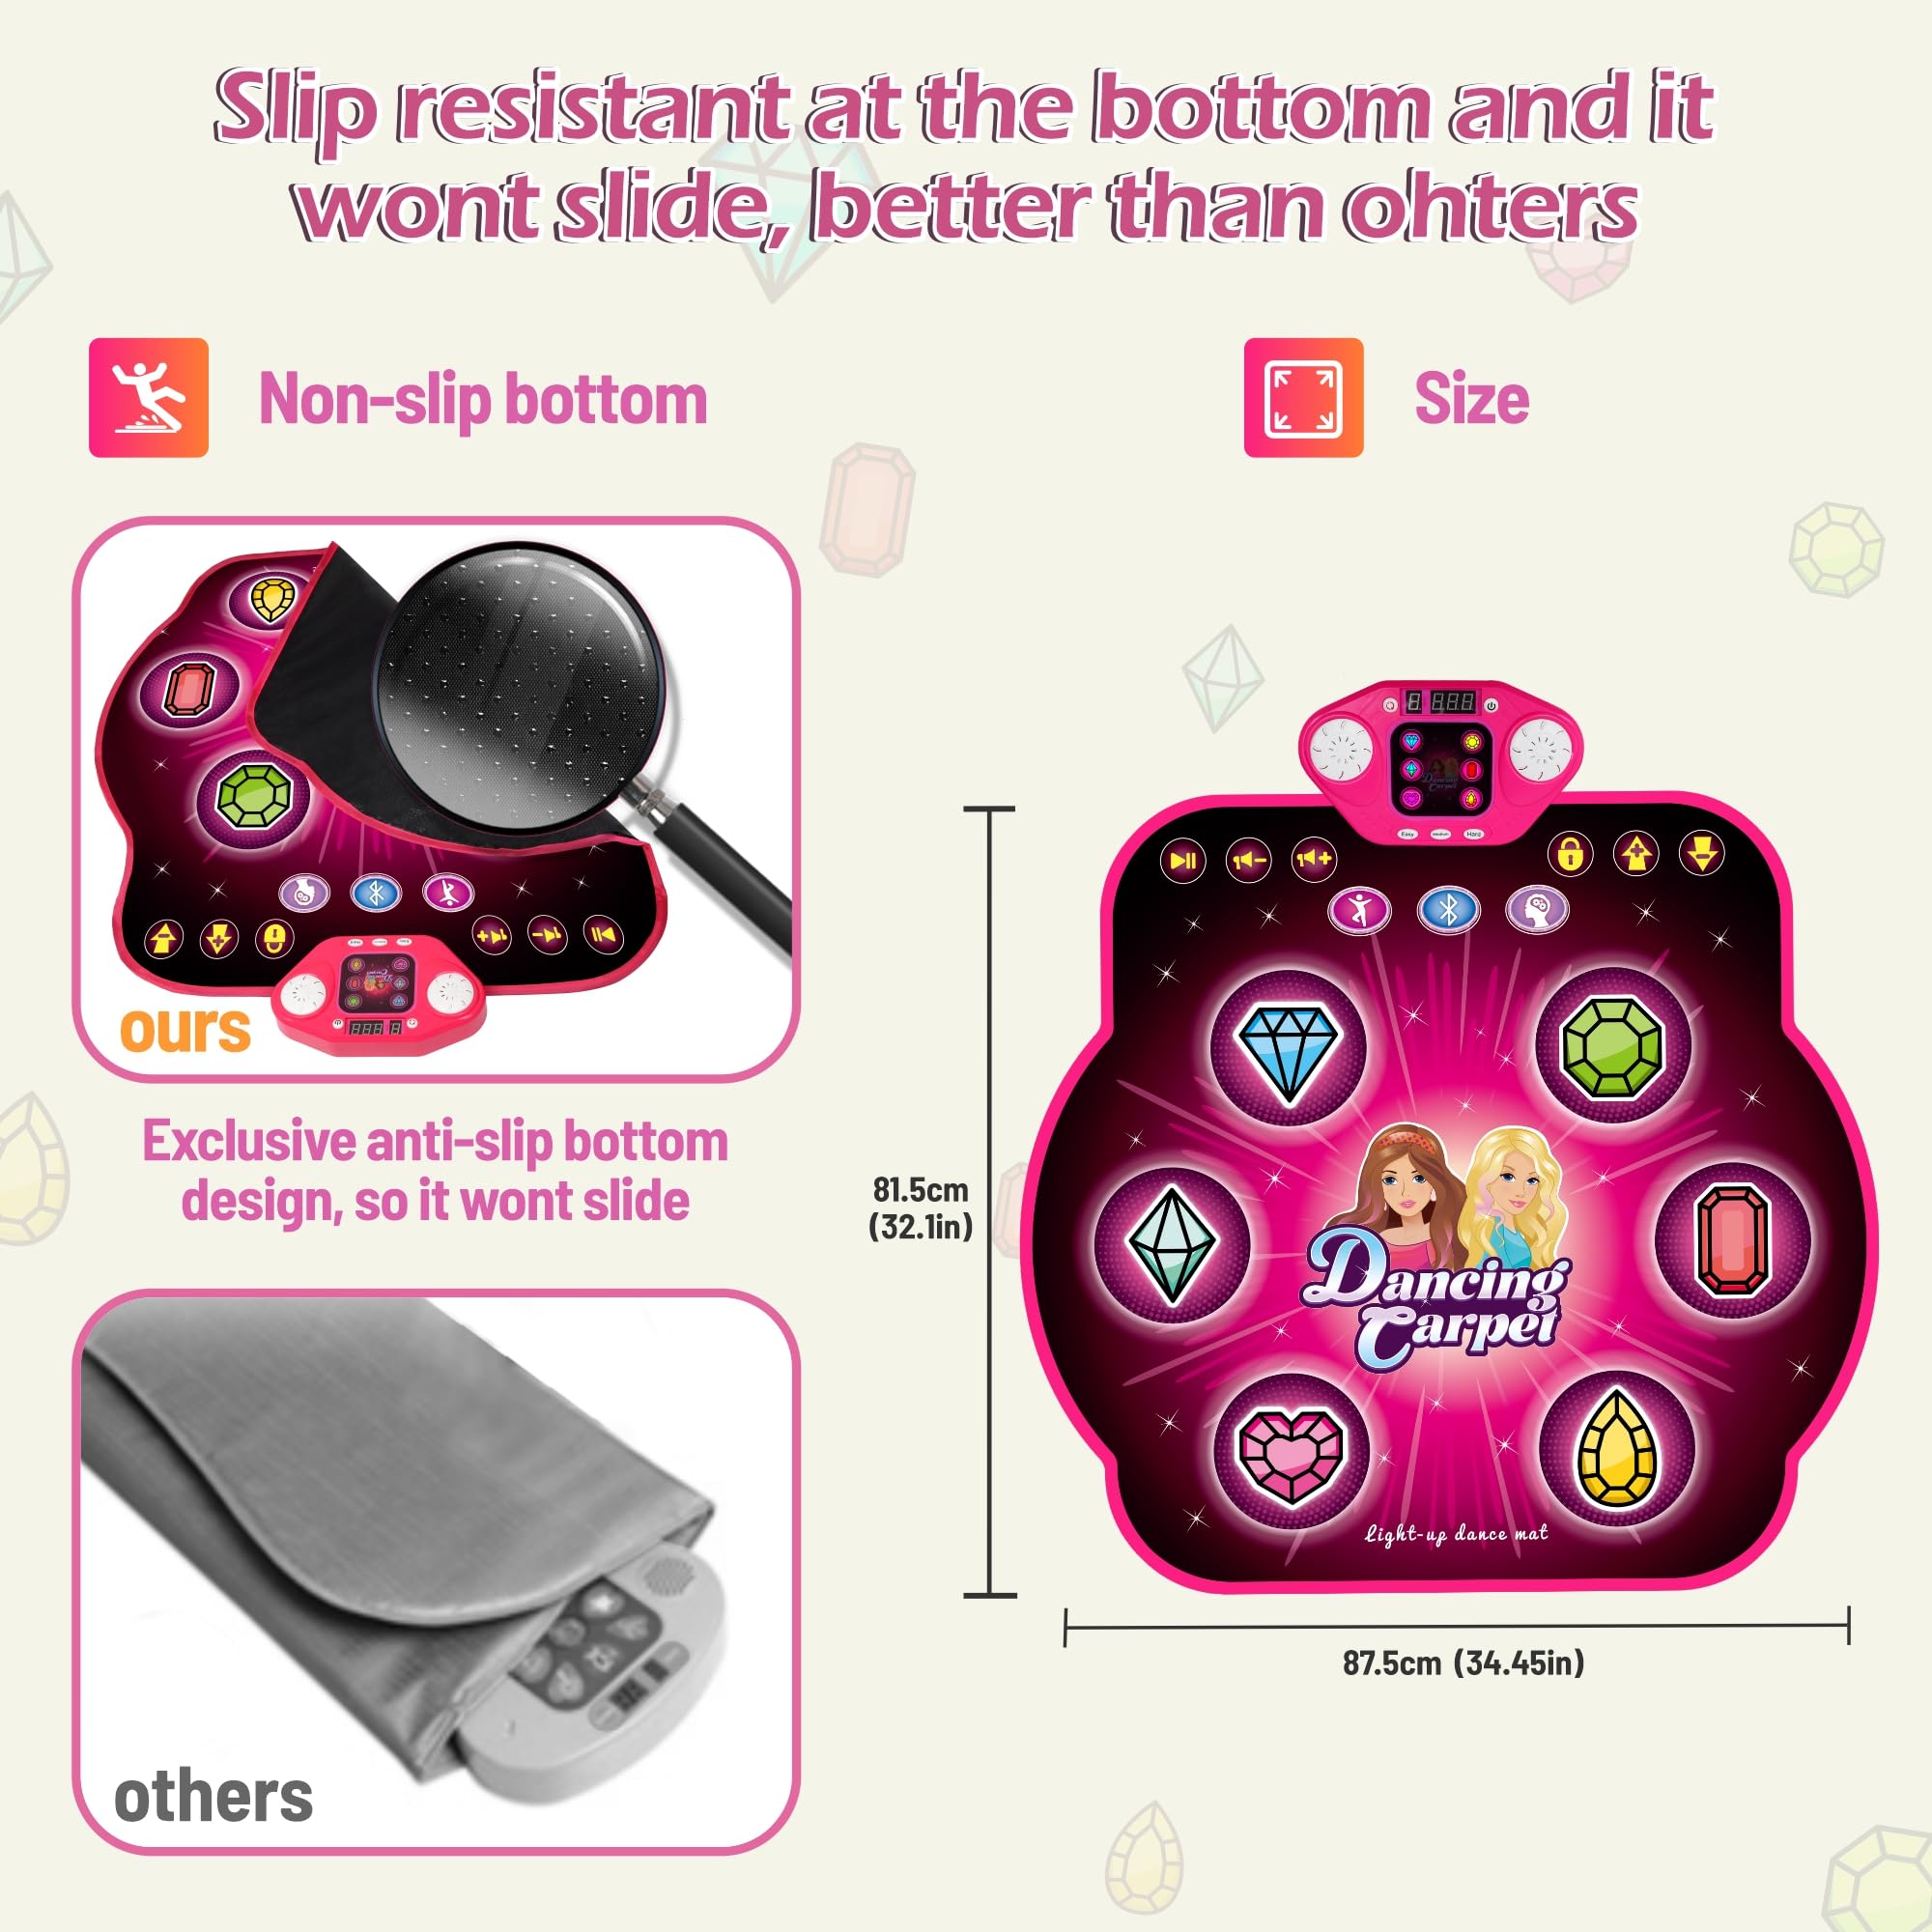 Dance Mat Toys for 4-12 Year Old Kids, Light-up Dancing Challenges Bluetooth Electronic Dance Mat with 6 Game Modes, Birthday/Xmas Gifts for 4-12 Year Old Girls